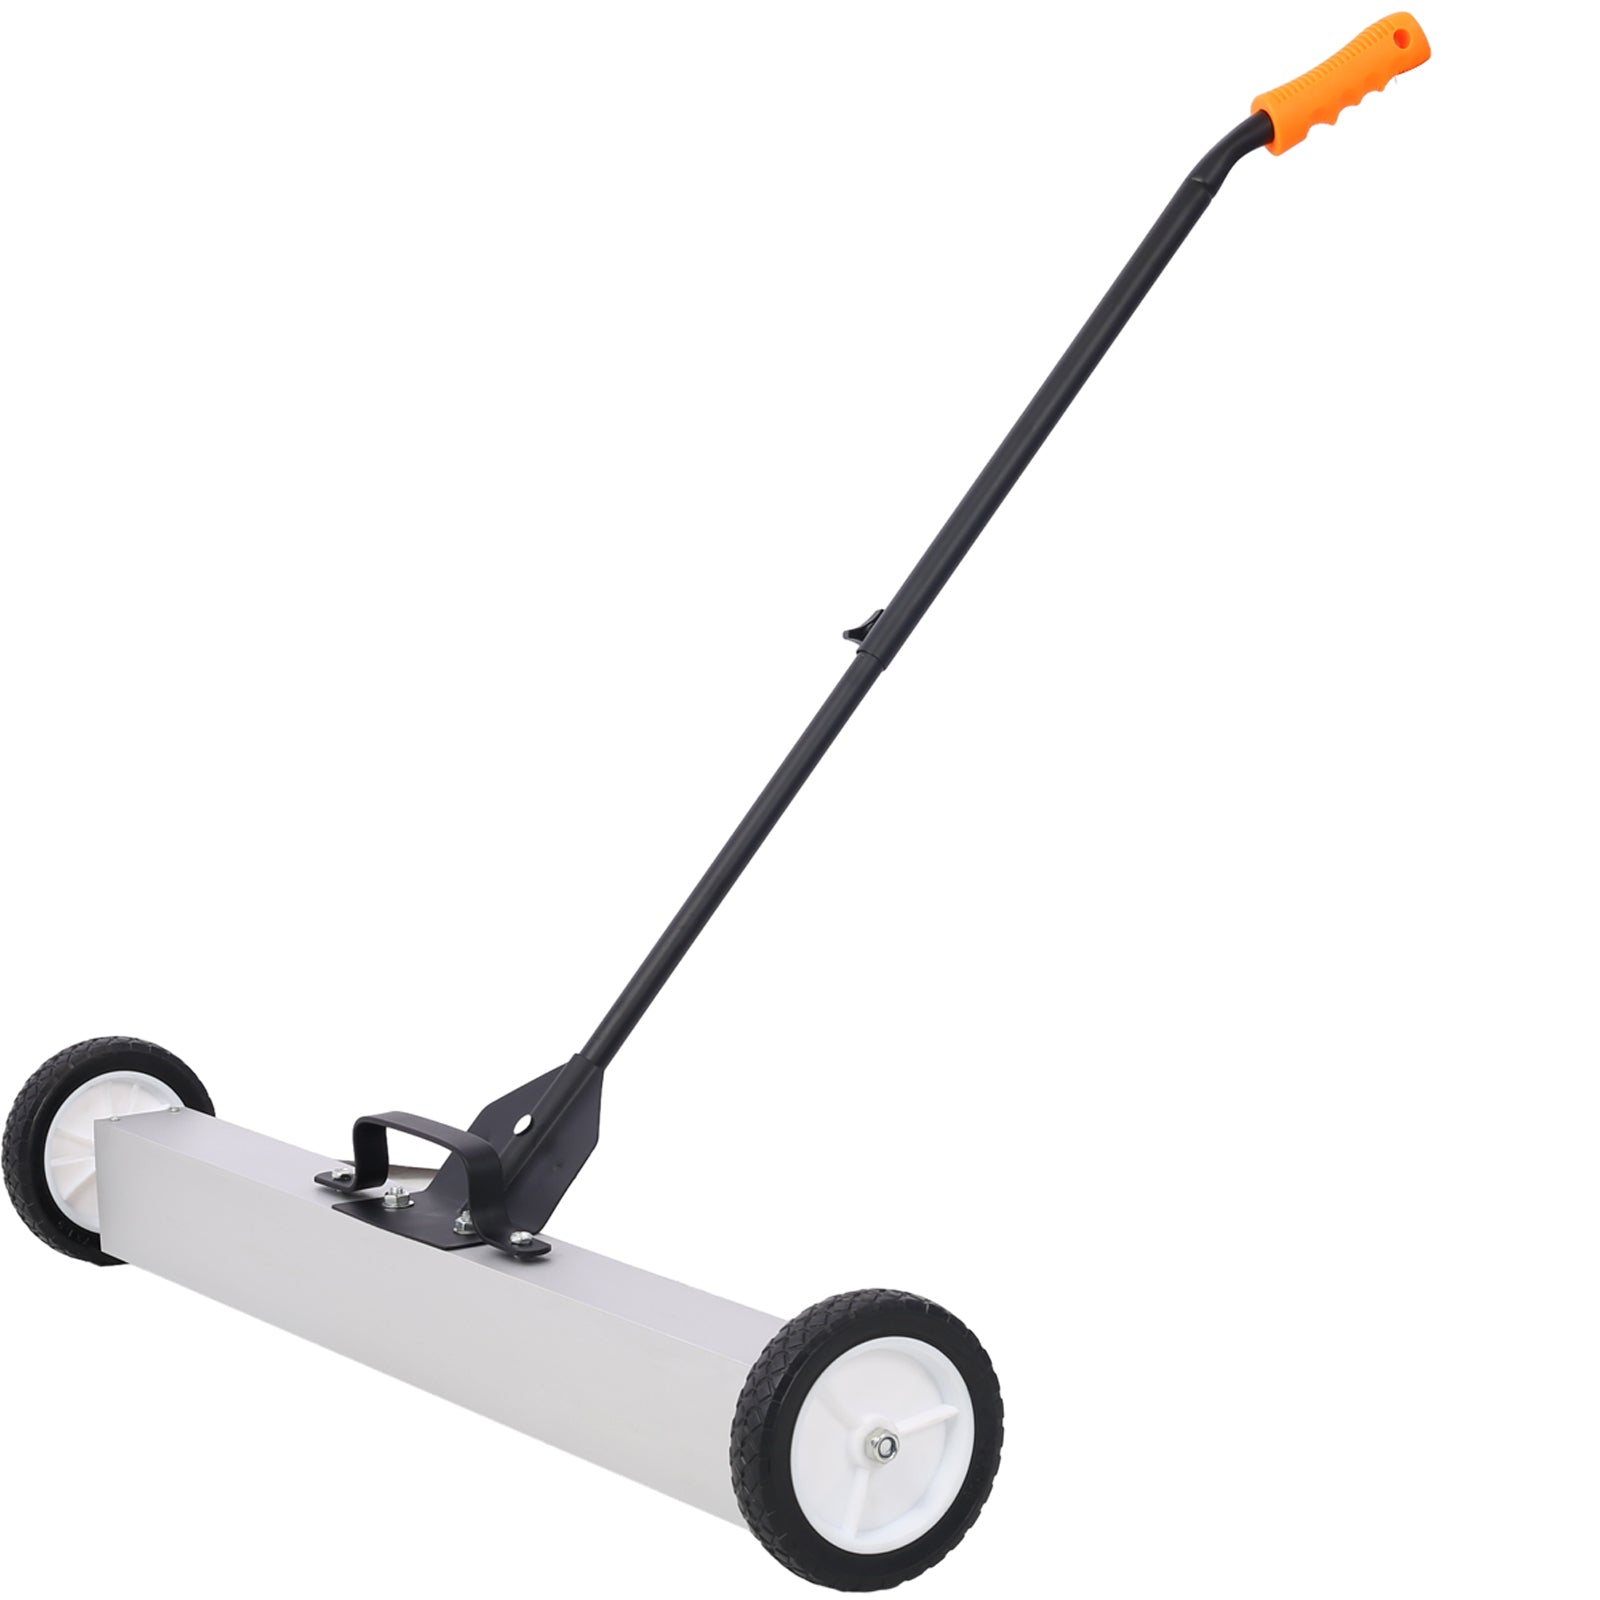 36"  Rolling Magnetic Pick-Up Sweeper, Heavy Duty Push-Type with Release, for Nails Needles Screws Collection,30 Pound Capacity - Tonkn